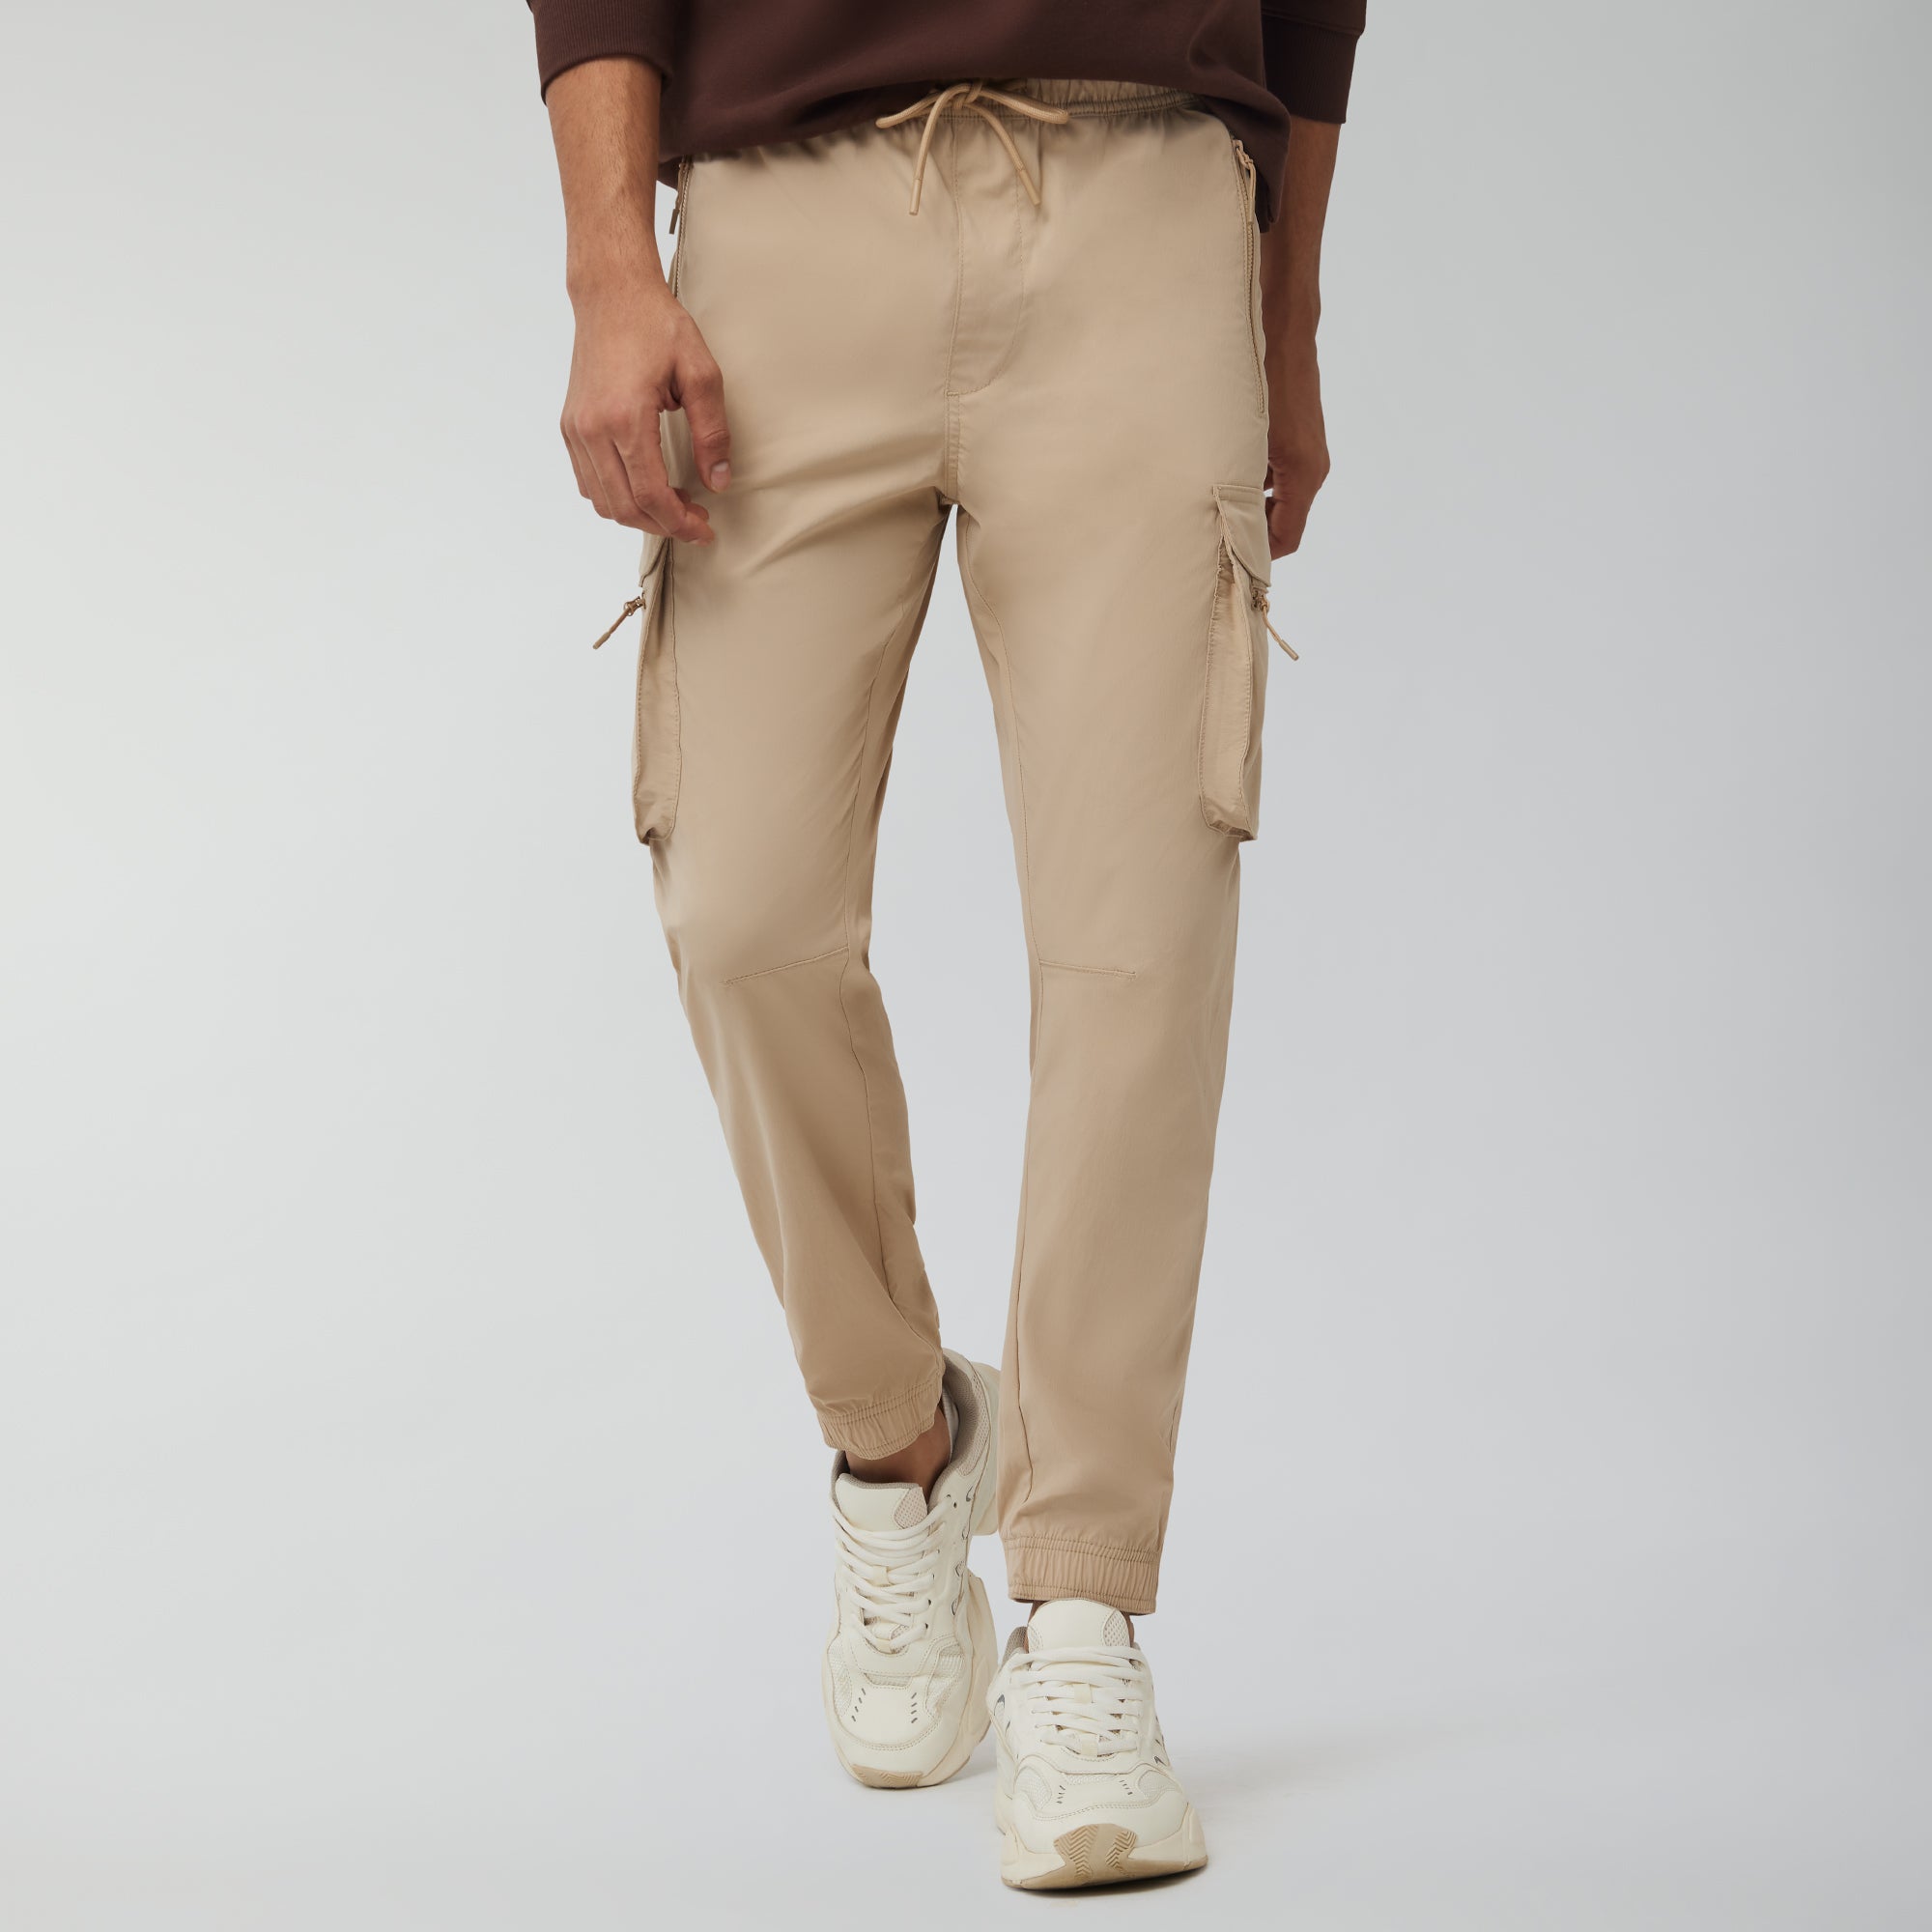 Trail Cargo Men's Joggers - Brown